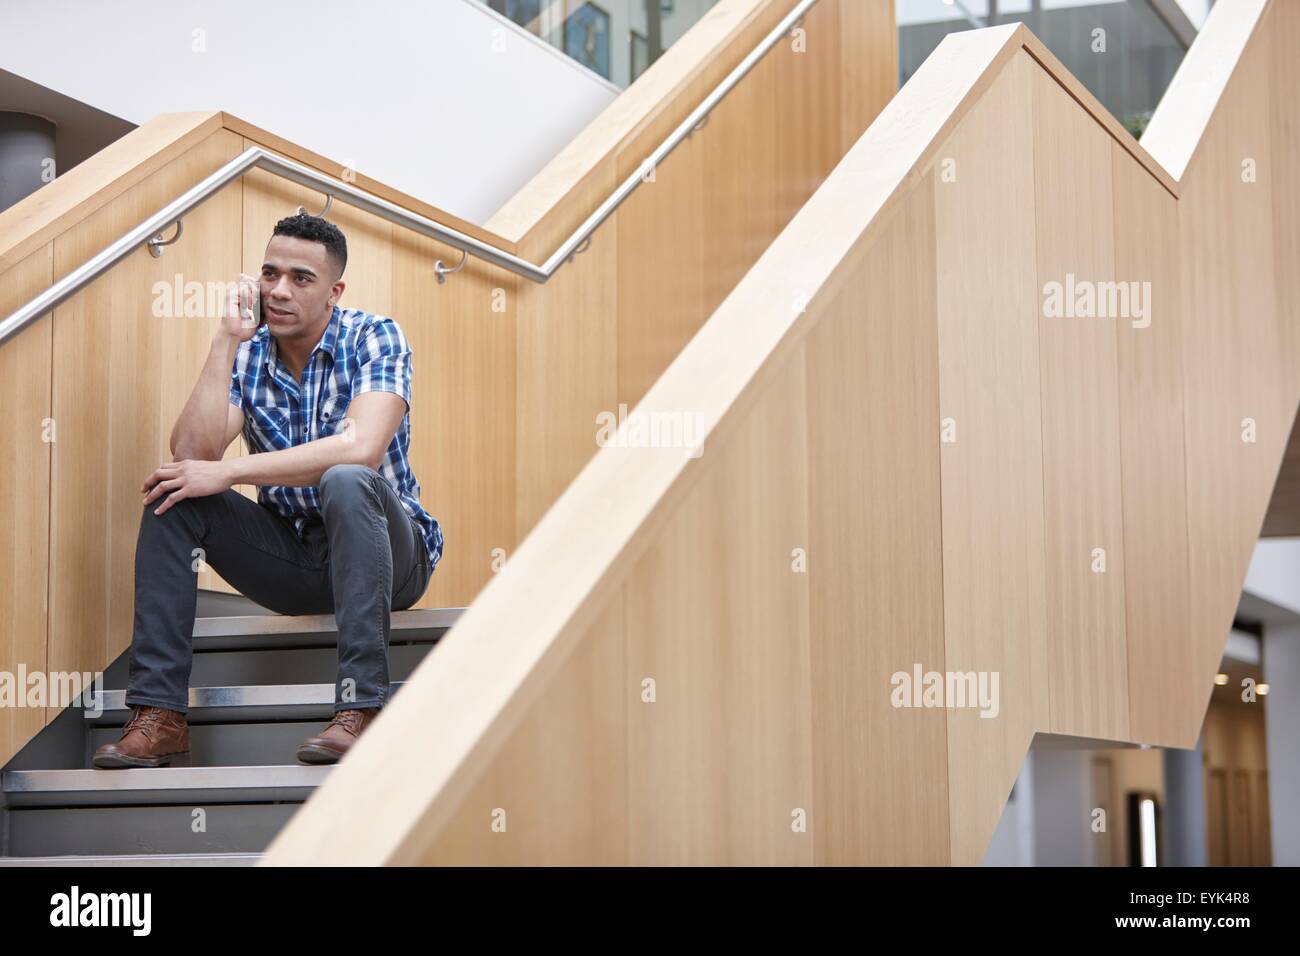 Young businessman sitting on office stairway chatting on smartphone Stock Photo